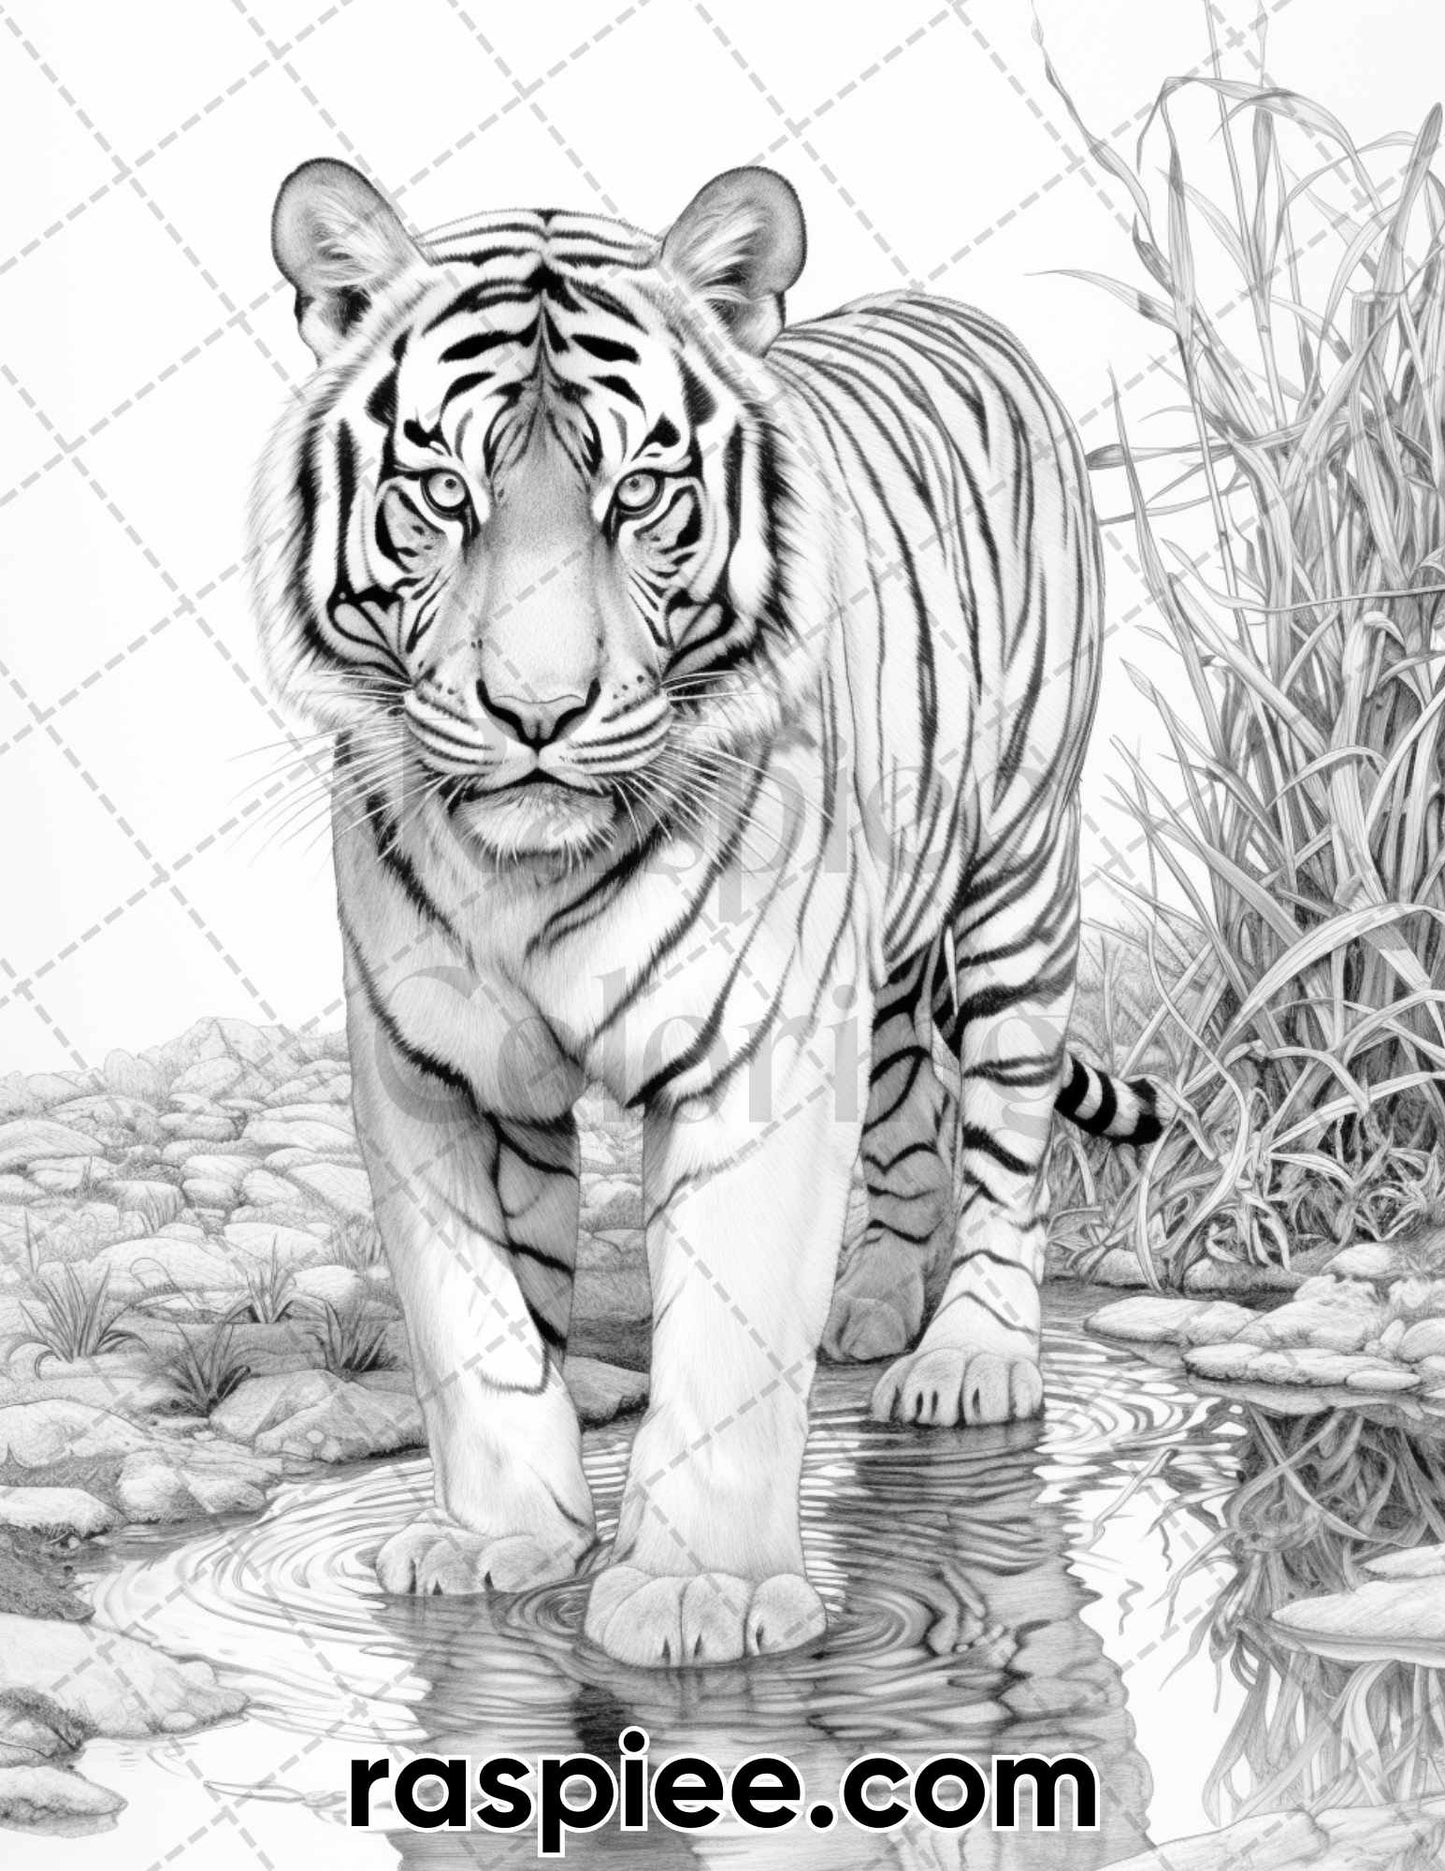 Wild Animals Coloring Pages, Adult Coloring Prints, Relaxing Wildlife Coloring, Stress Relief Coloring Book, Detailed Adult Coloring, Creative Relaxation Activity, Printable Coloring Sheets, Grayscale Coloring Pages, Animals Coloring Book Printable 